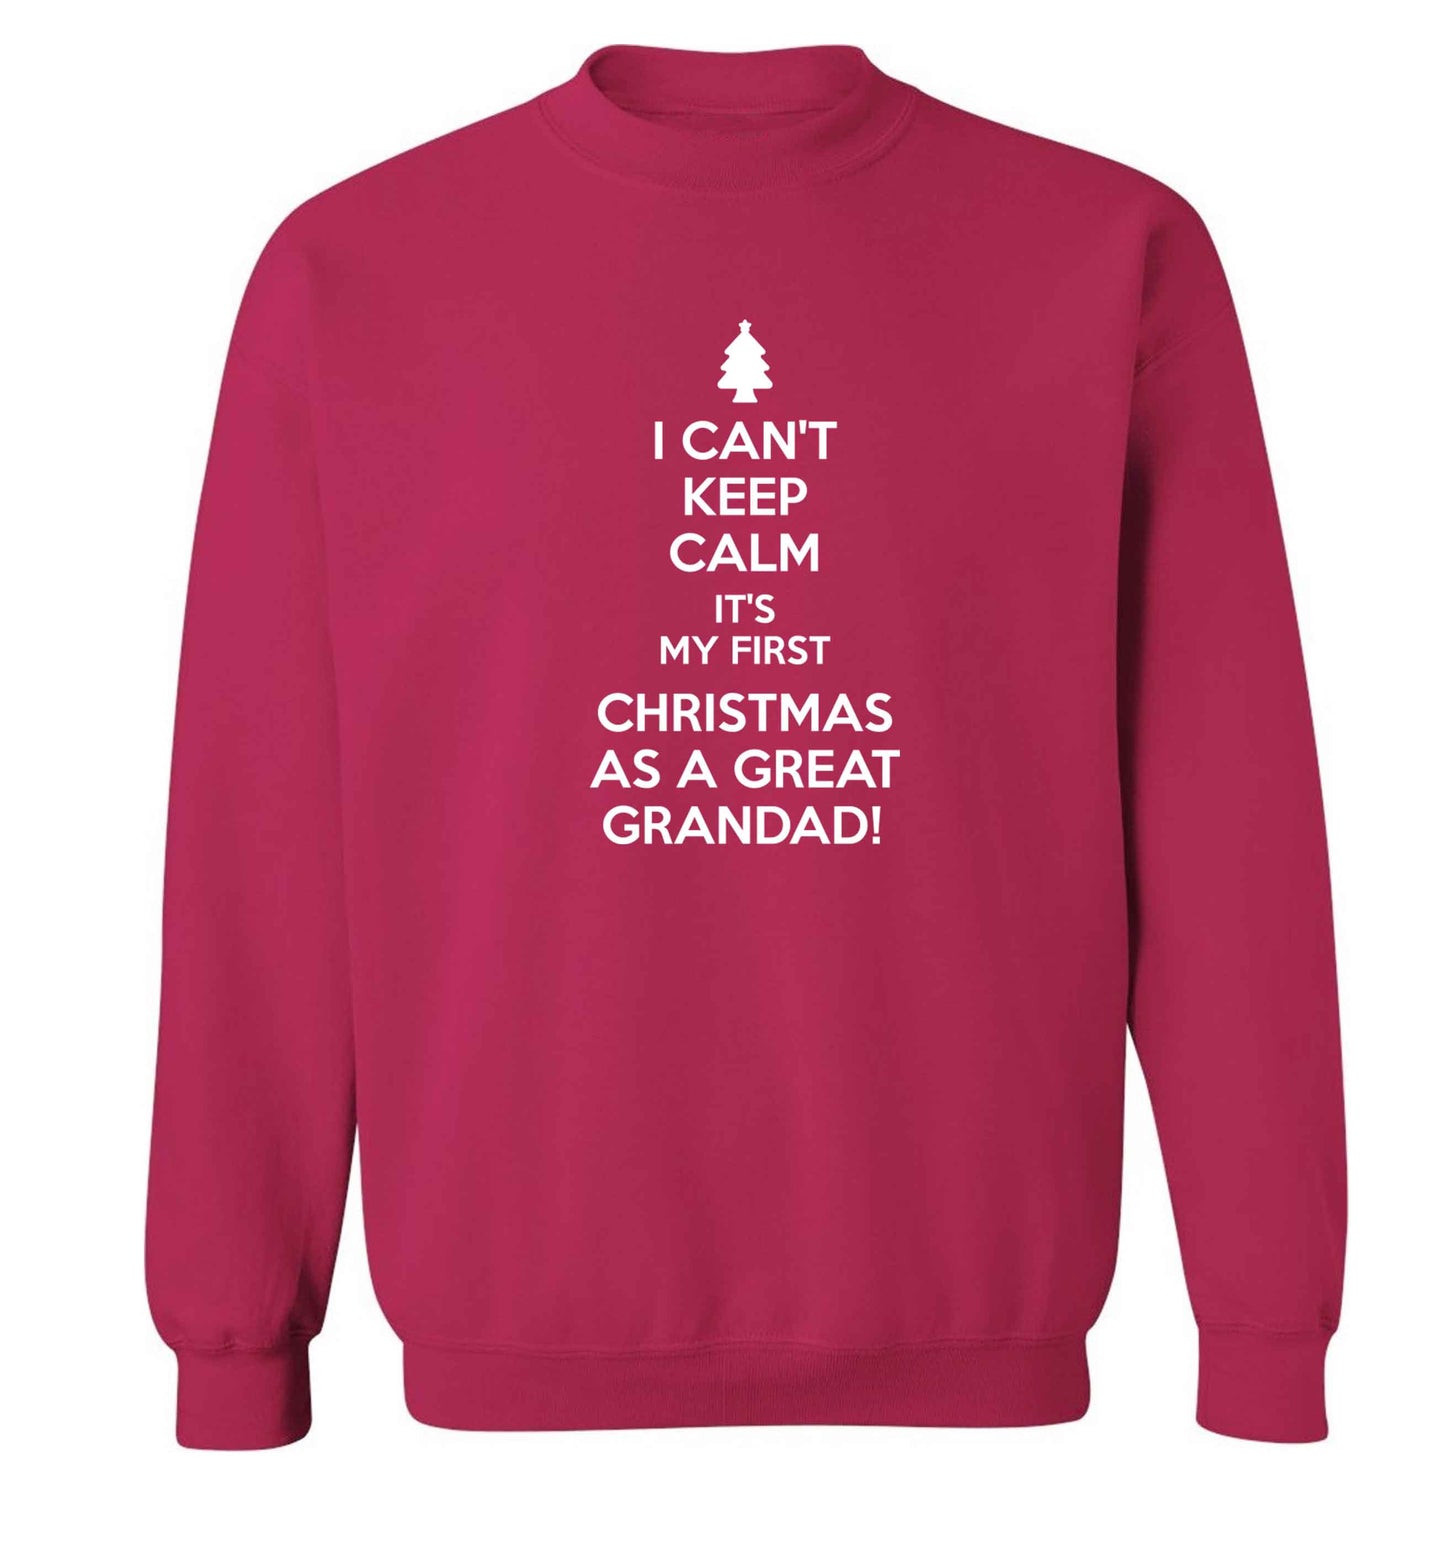 I can't keep calm it's my first Christmas as a great grandad! Adult's unisex pink Sweater 2XL